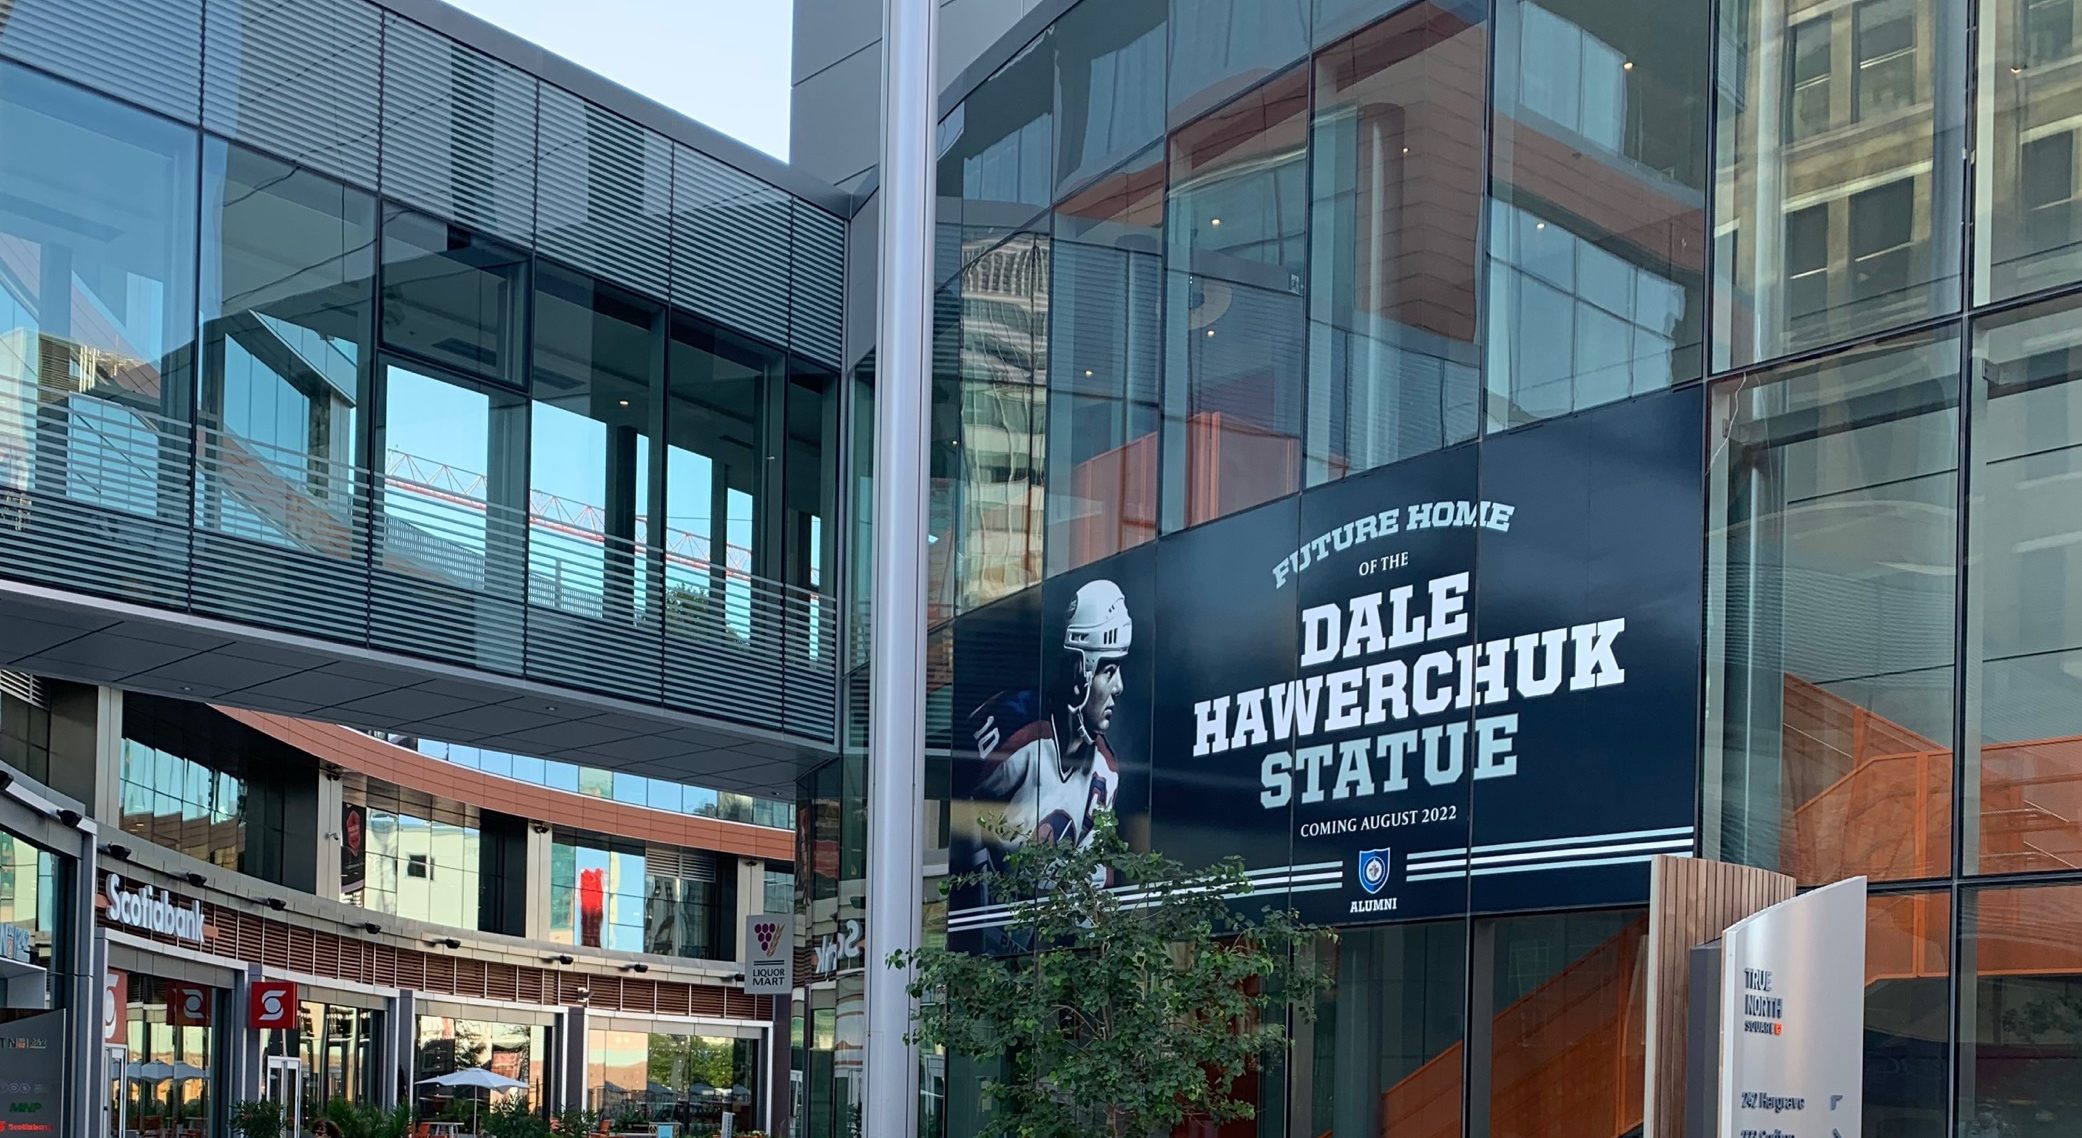 He is home again': Dale Hawerchuk statue unveiled at Winnipeg's